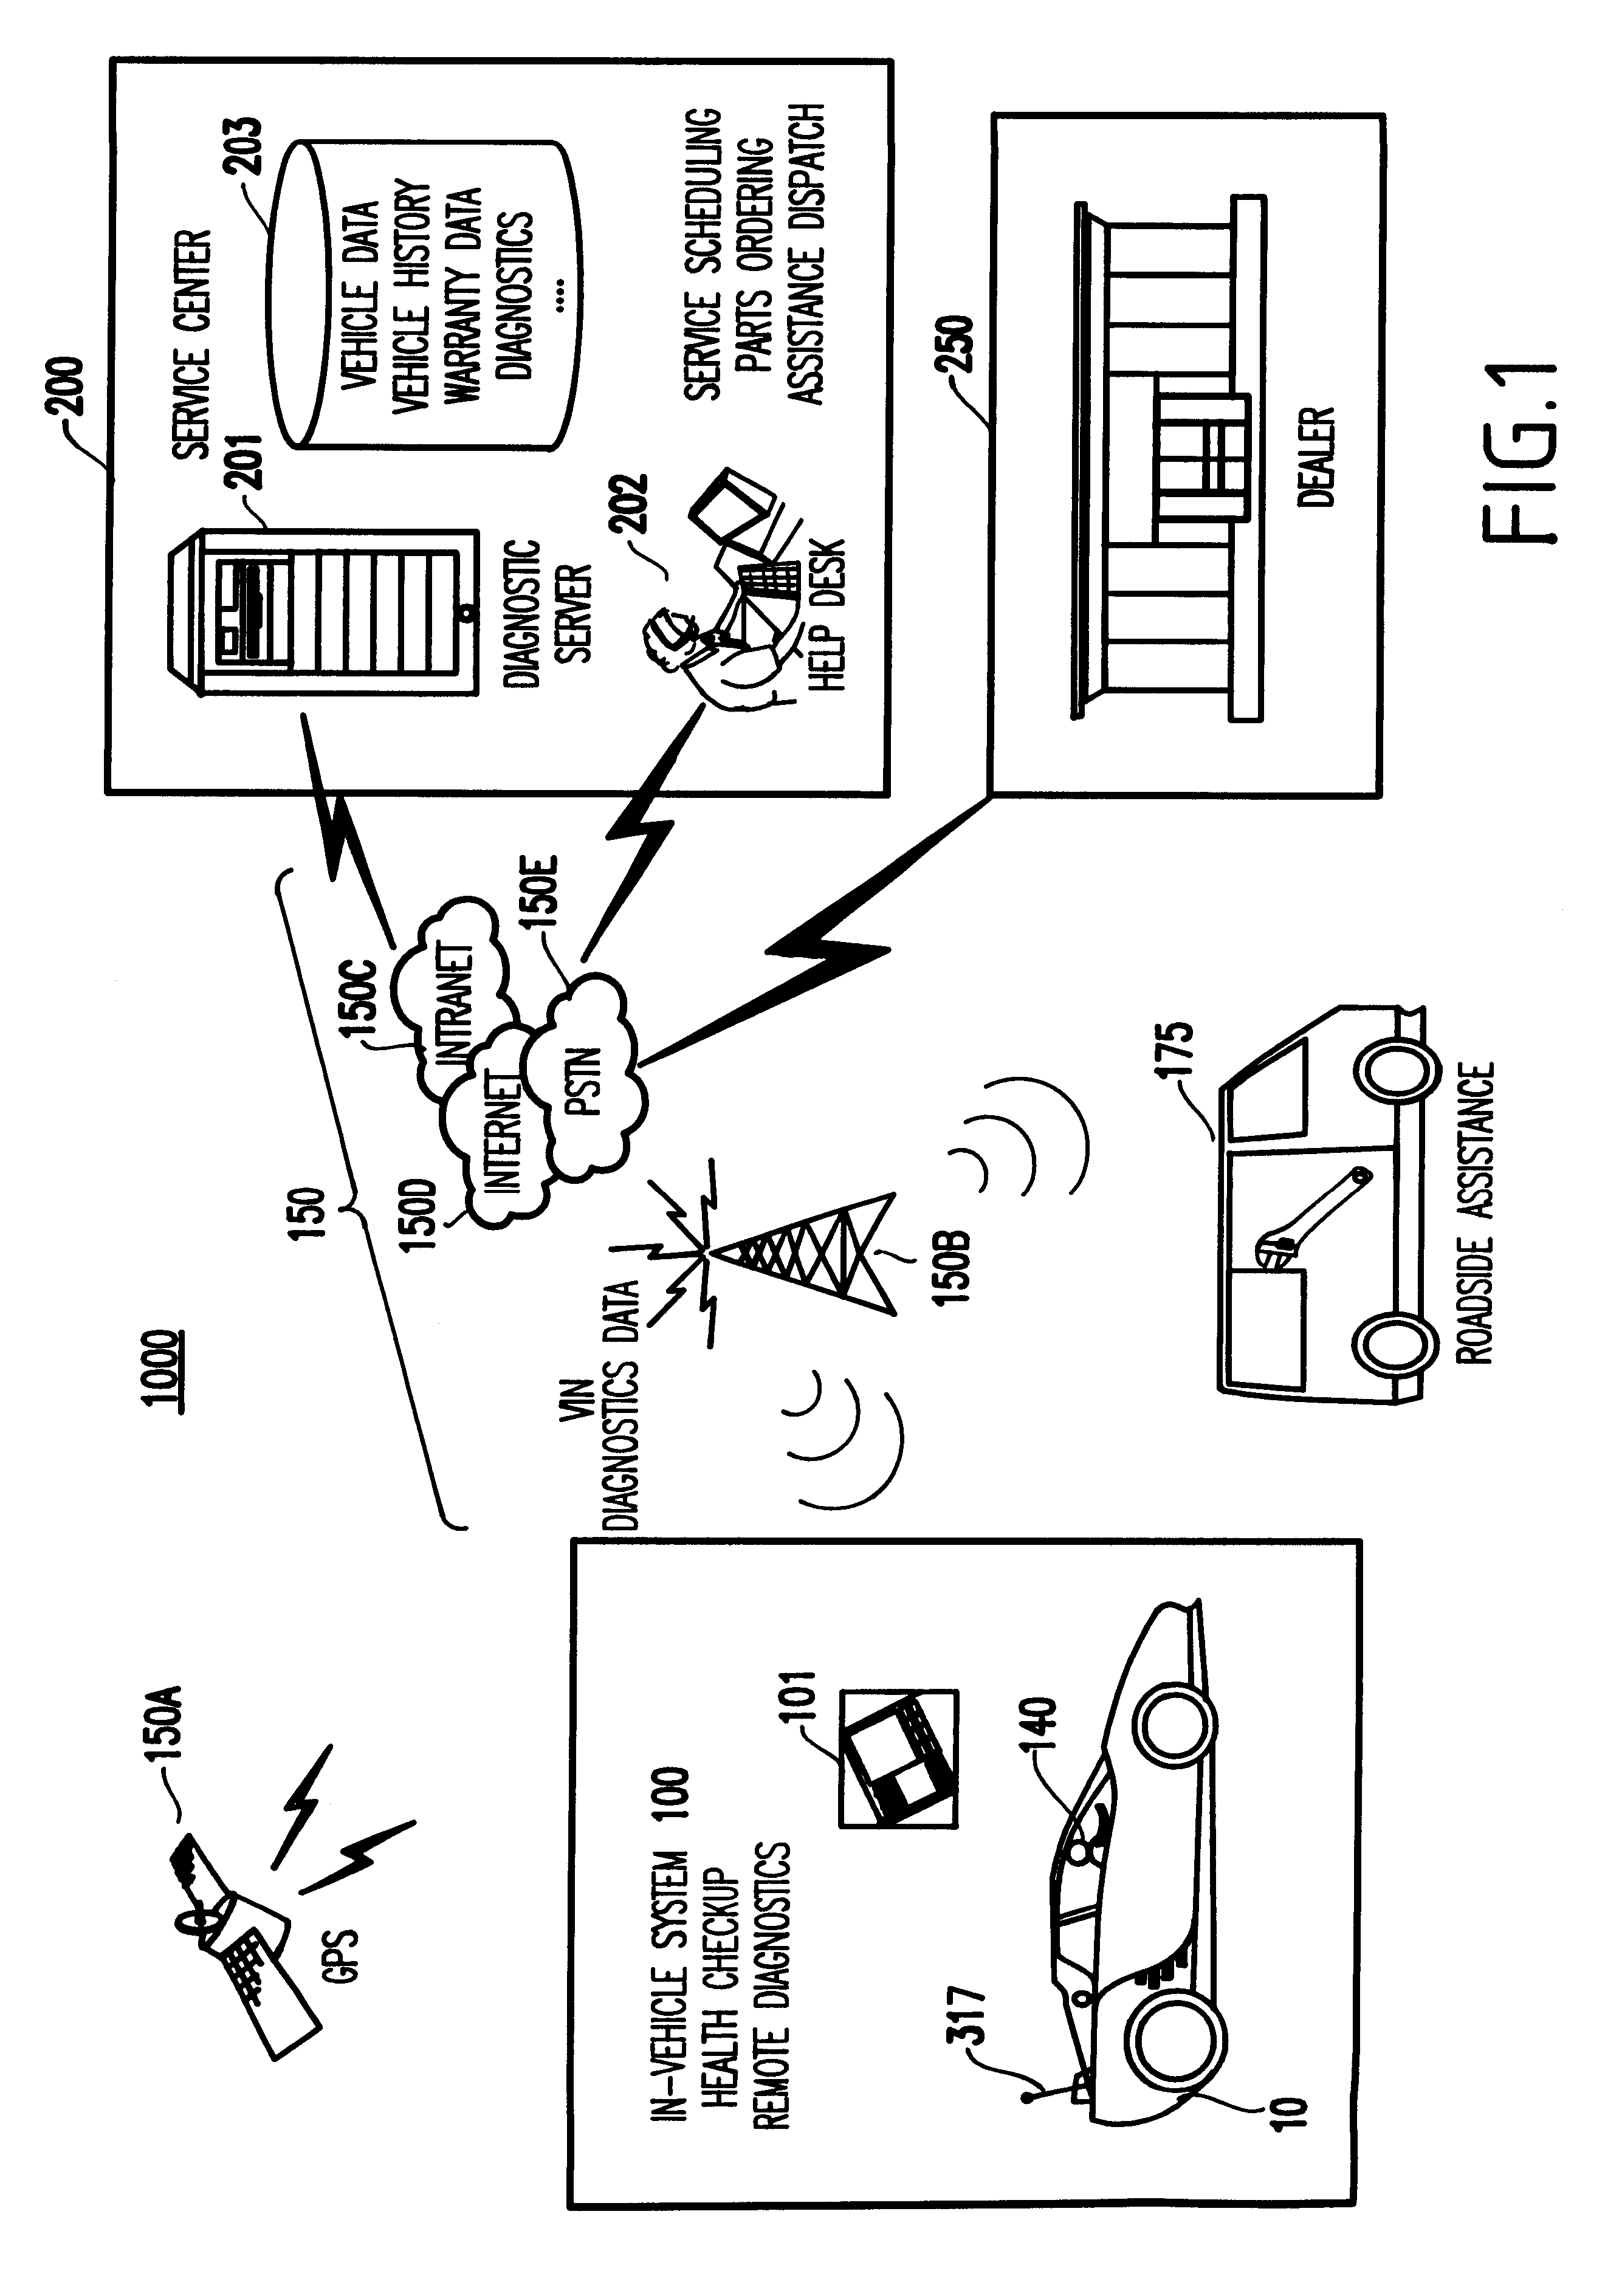 System and method for vehicle diagnostics and health monitoring